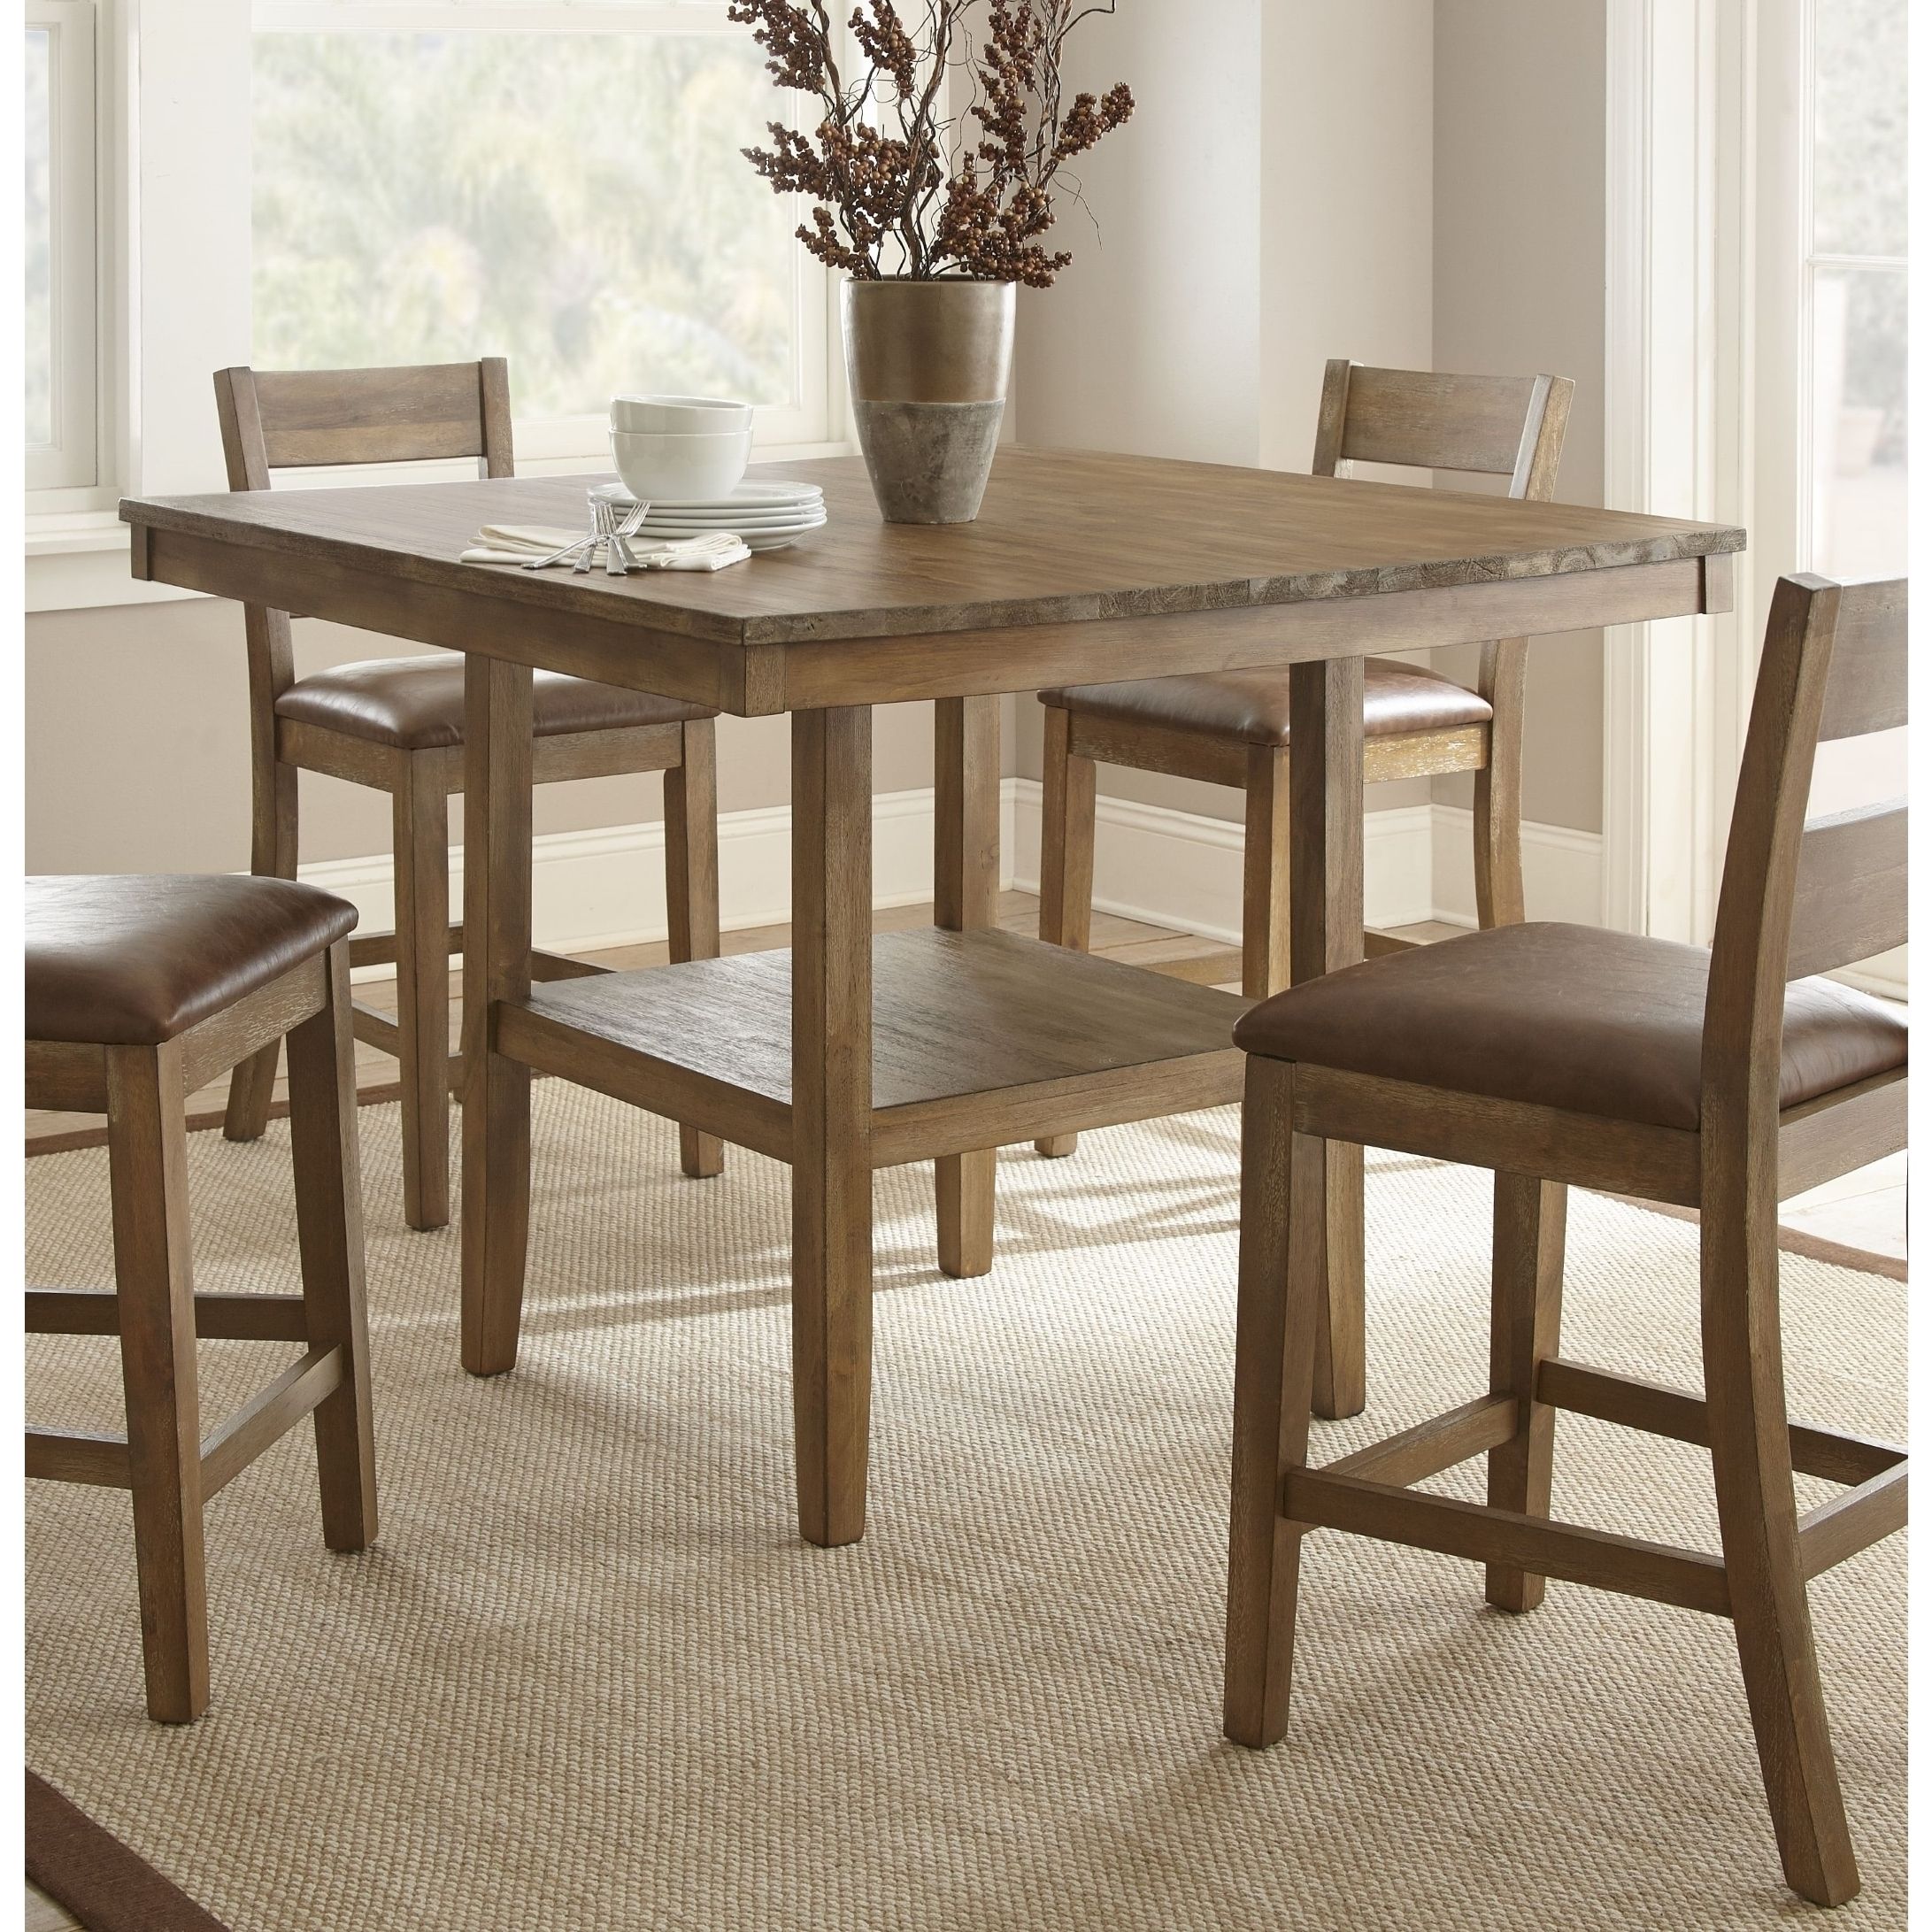 Latest Overstreet Bar Height Dining Tables Regarding Gathering Height Dining Table – Home Design Ideas (View 2 of 20)